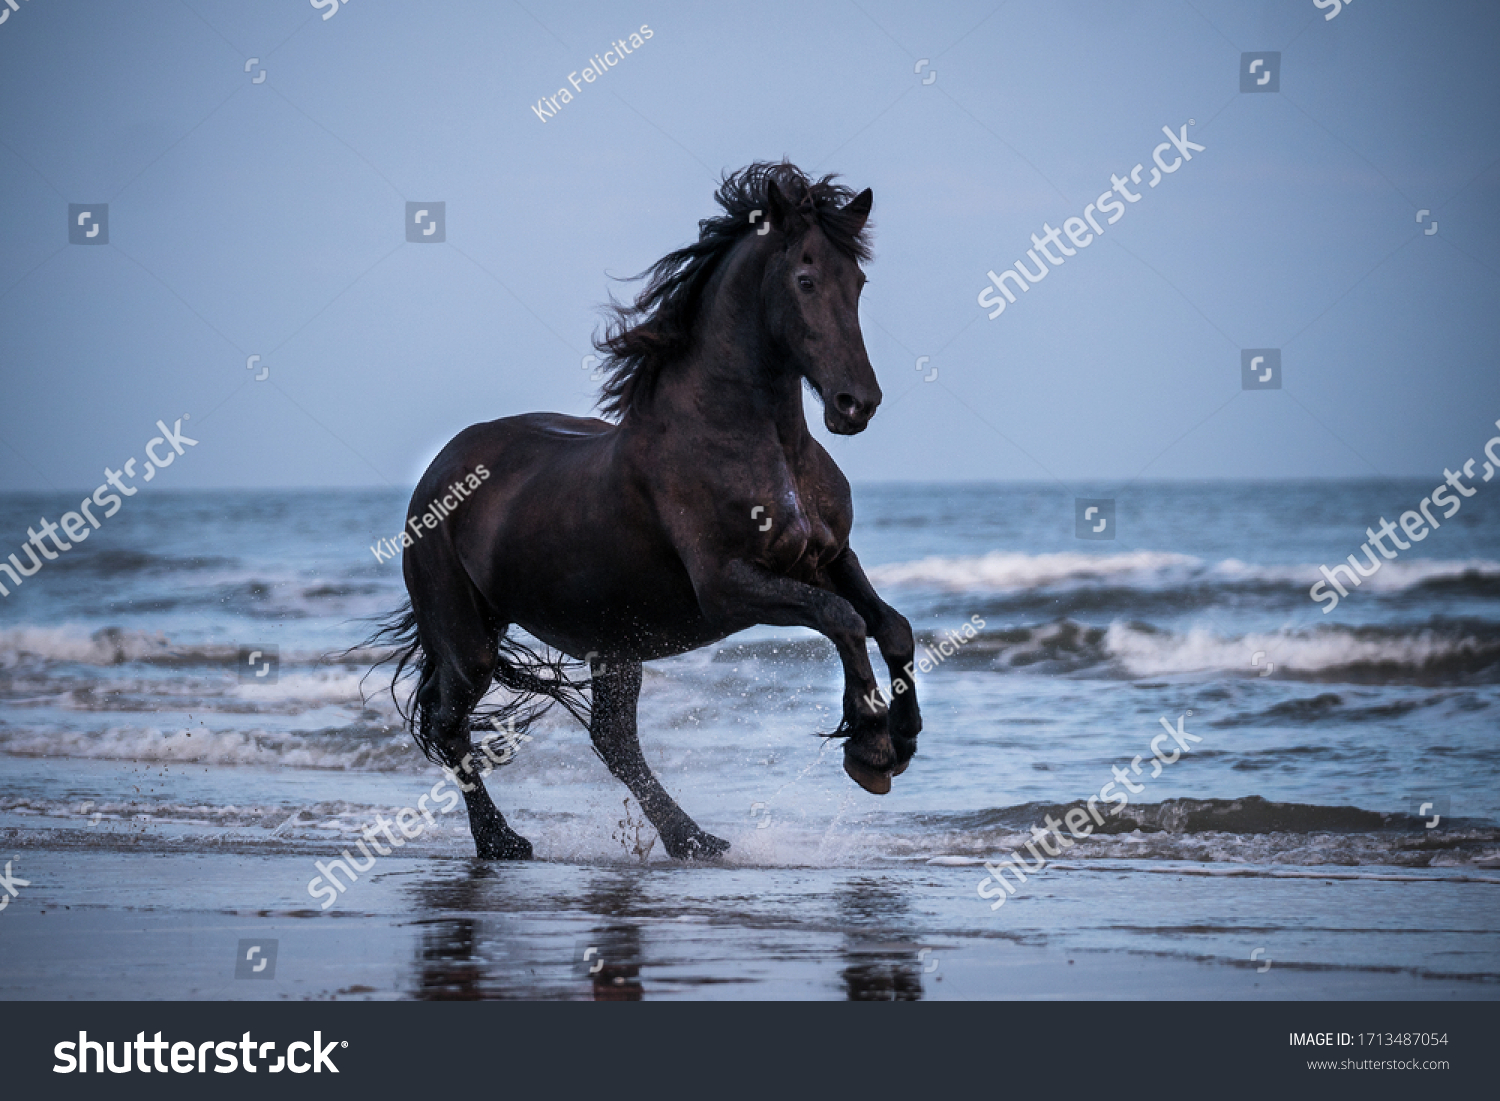 black horse galloping free at the beach #1713487054